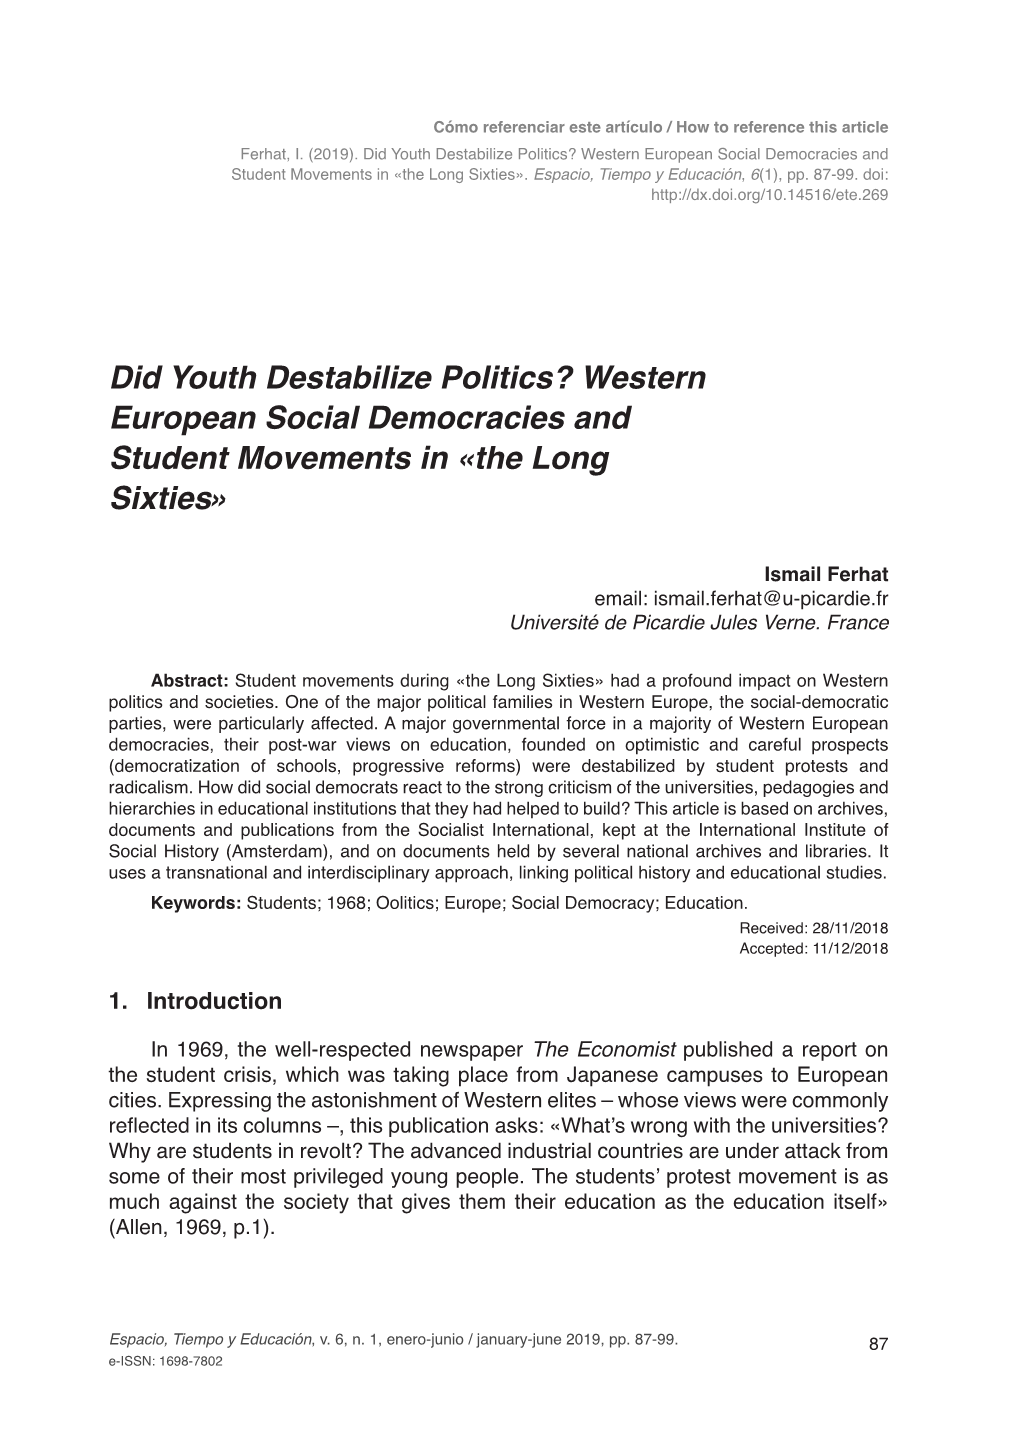 Western European Social Democracies and Student Movements in «The Long Sixties»